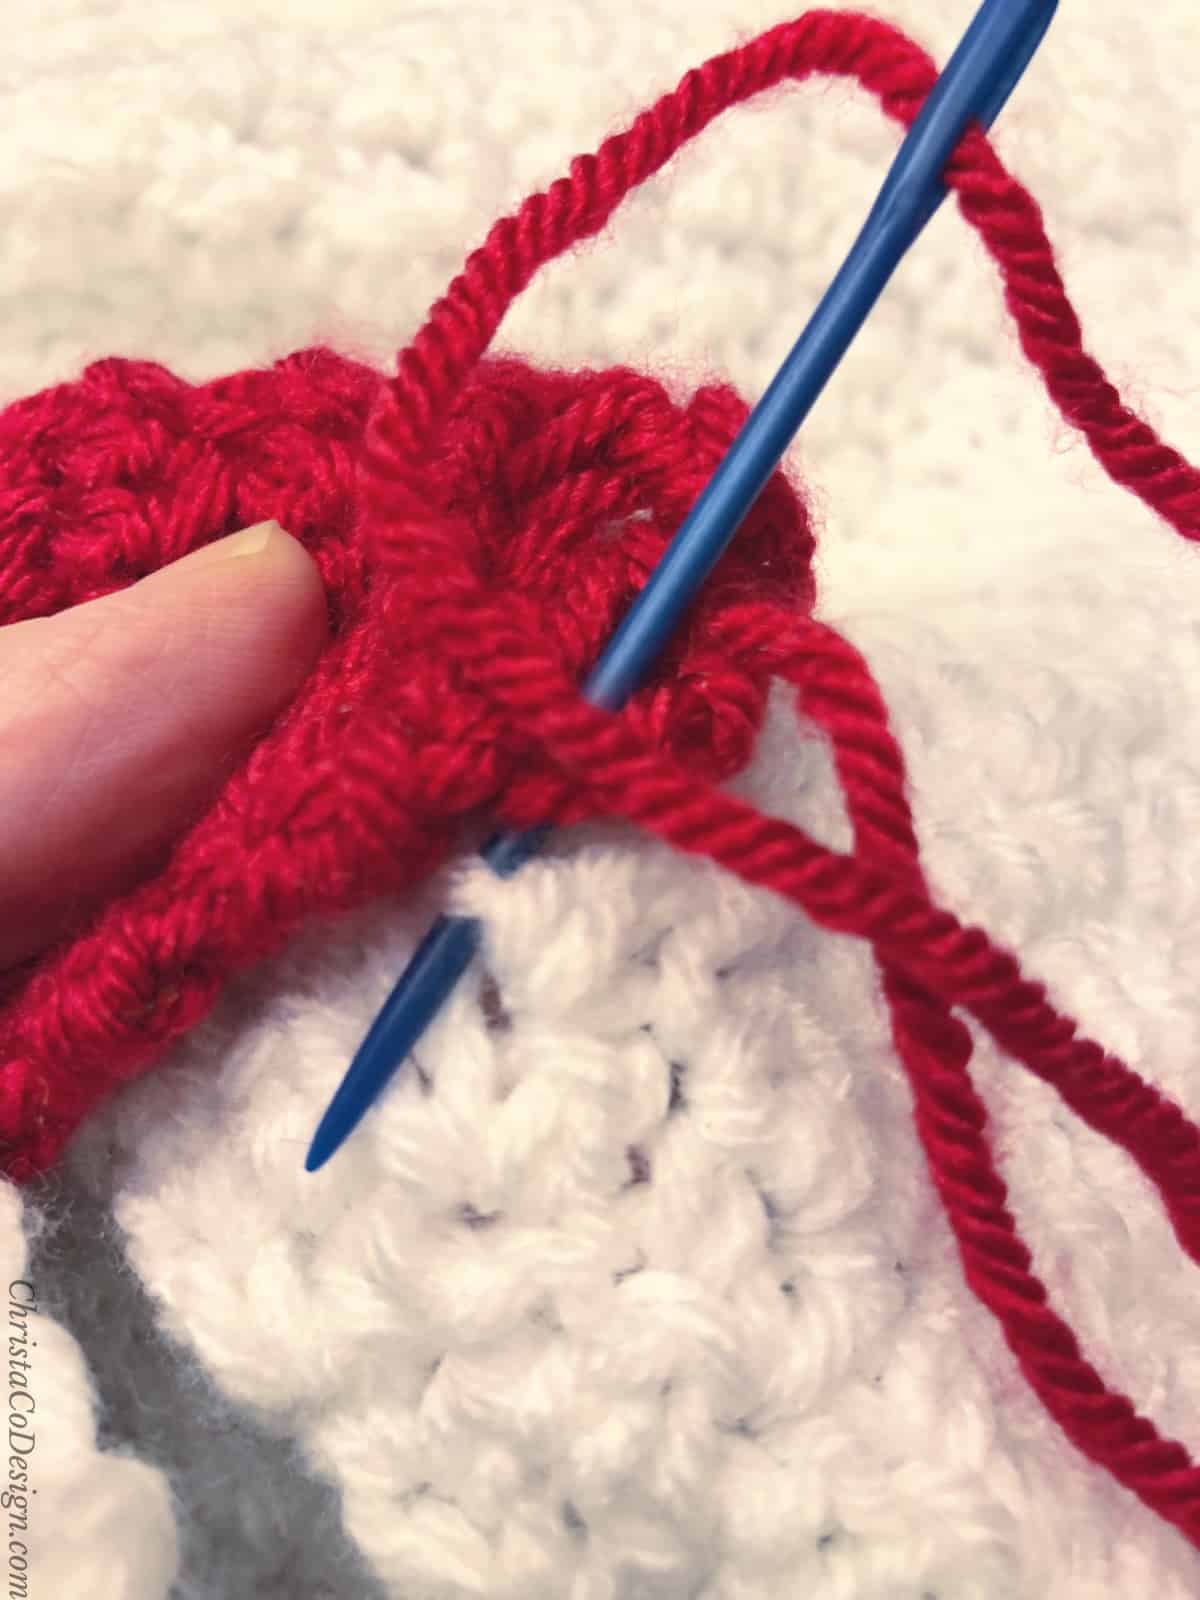 Sew the Christmas lights on to the finished crochet blanket with yarn and needle.